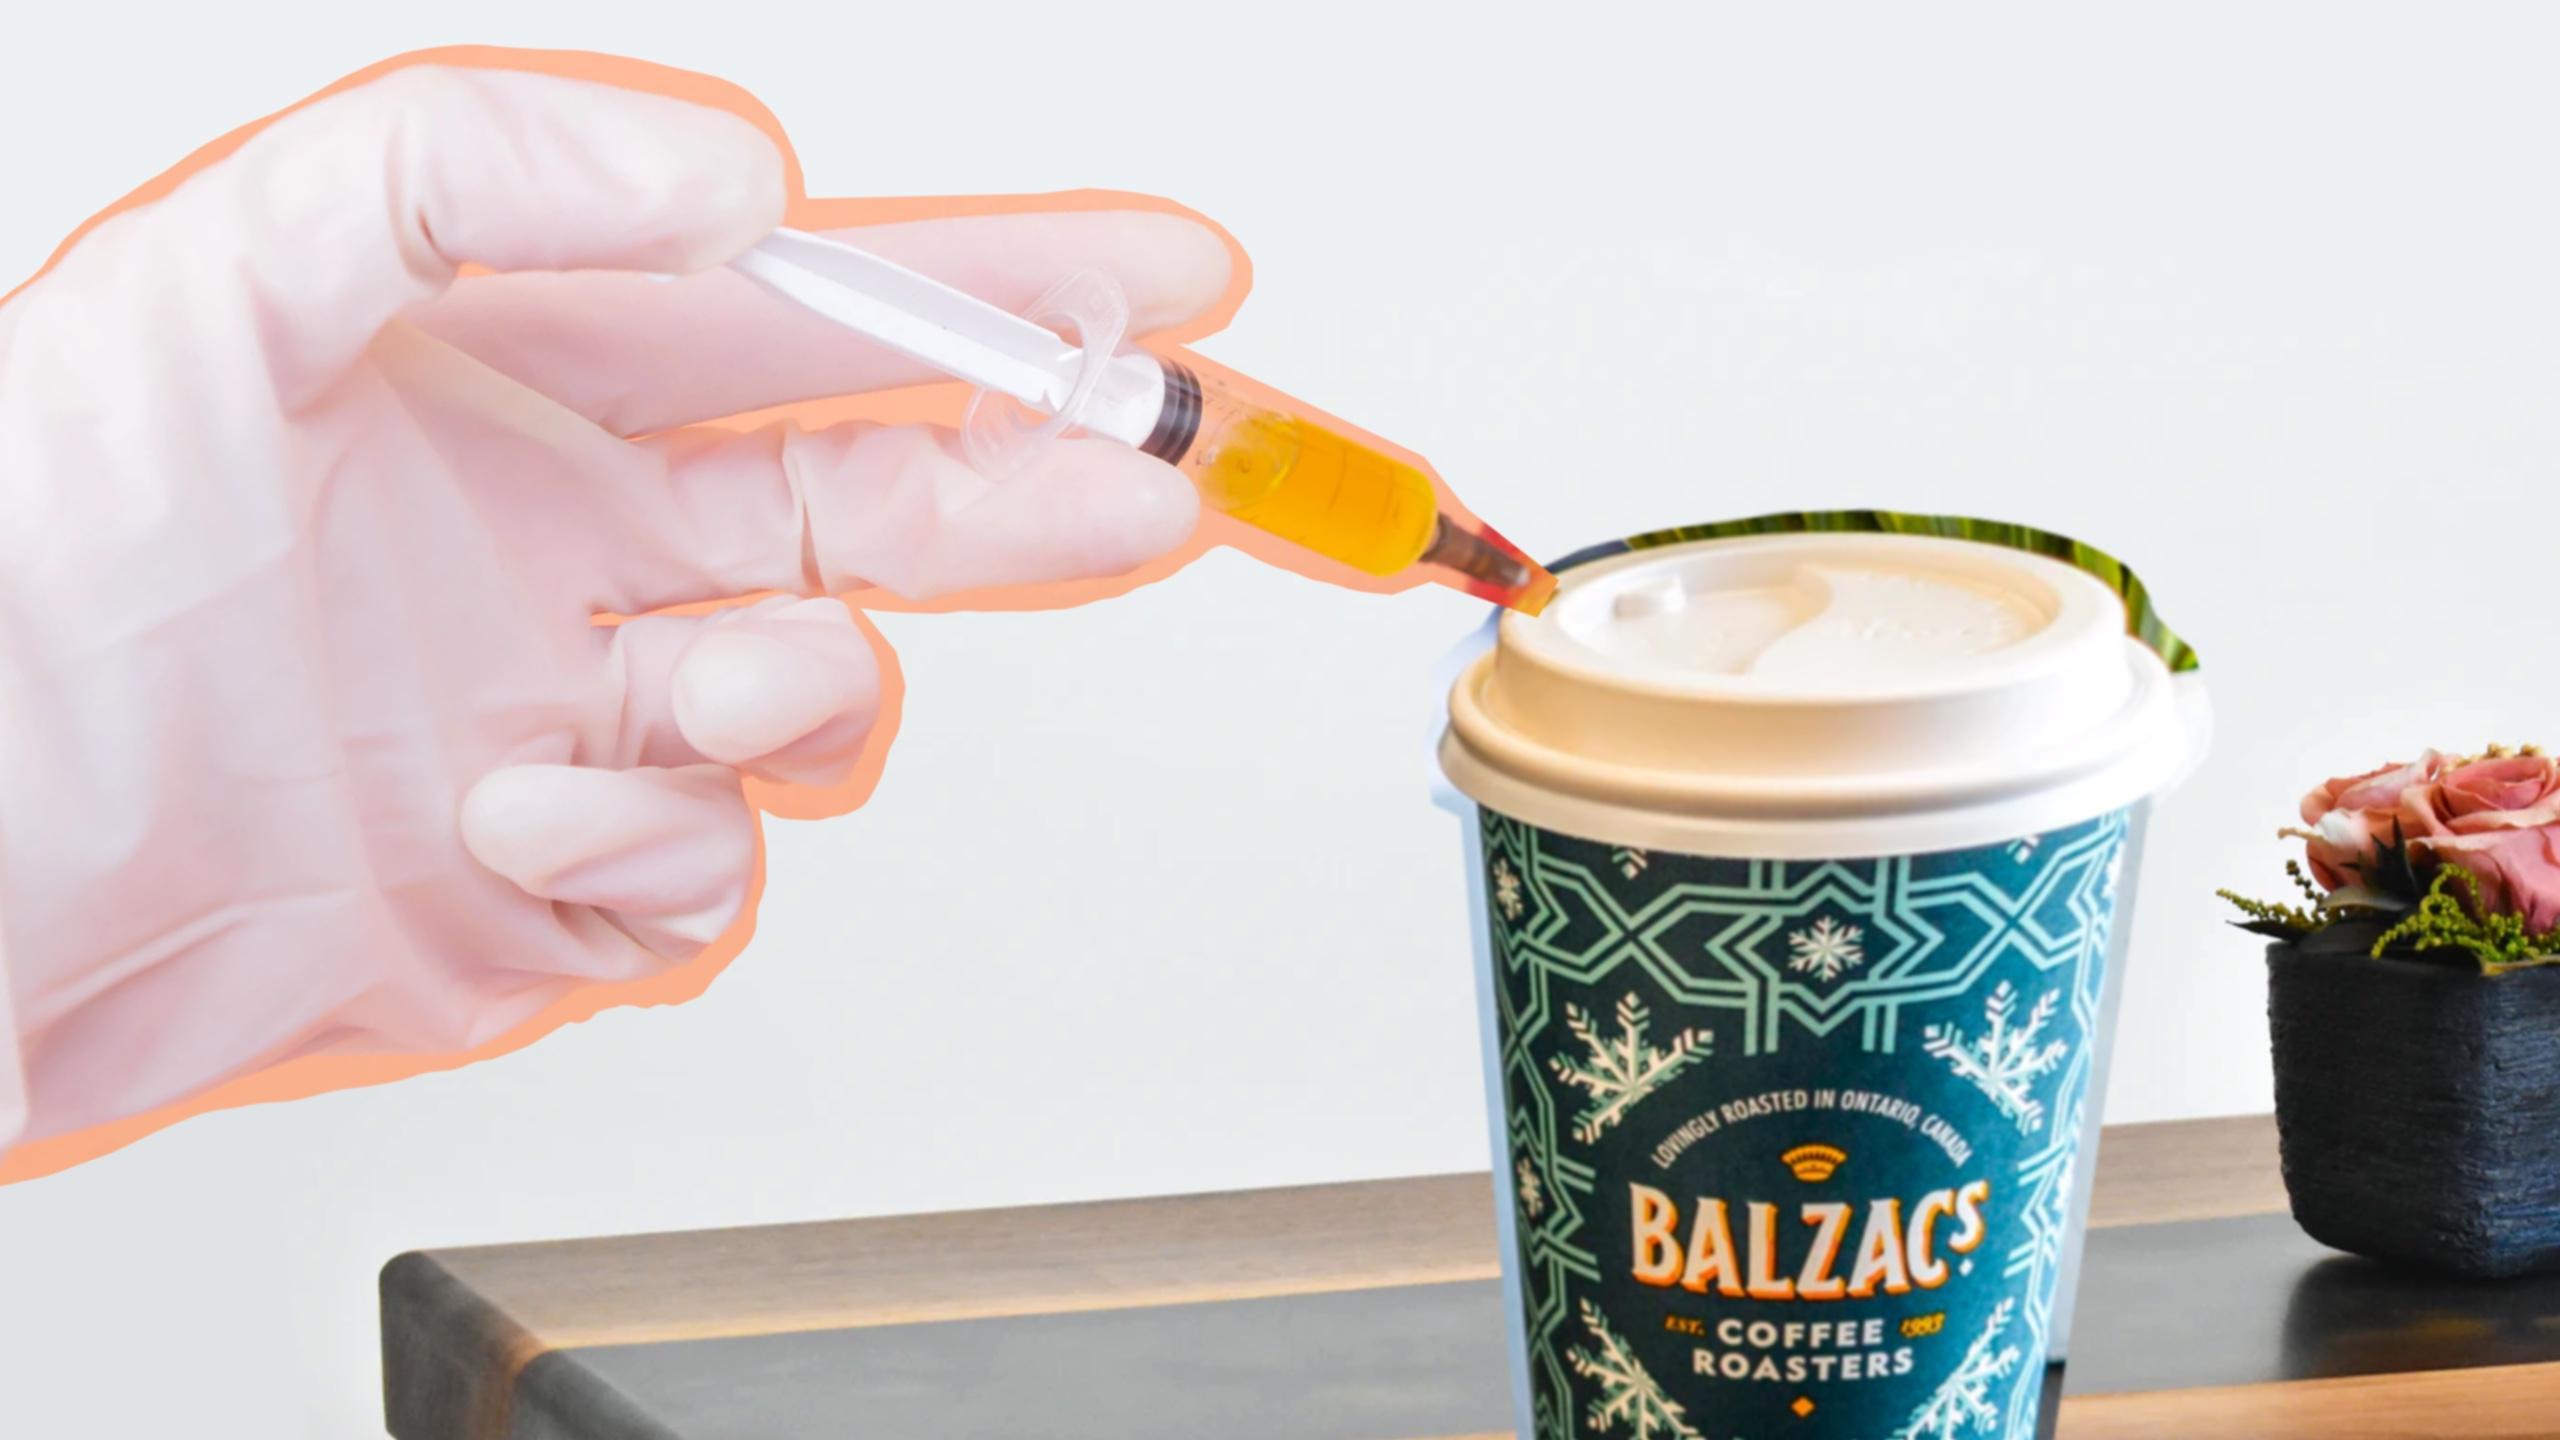 A gloved hand inserting a syringe into a Balzac's coffee cup